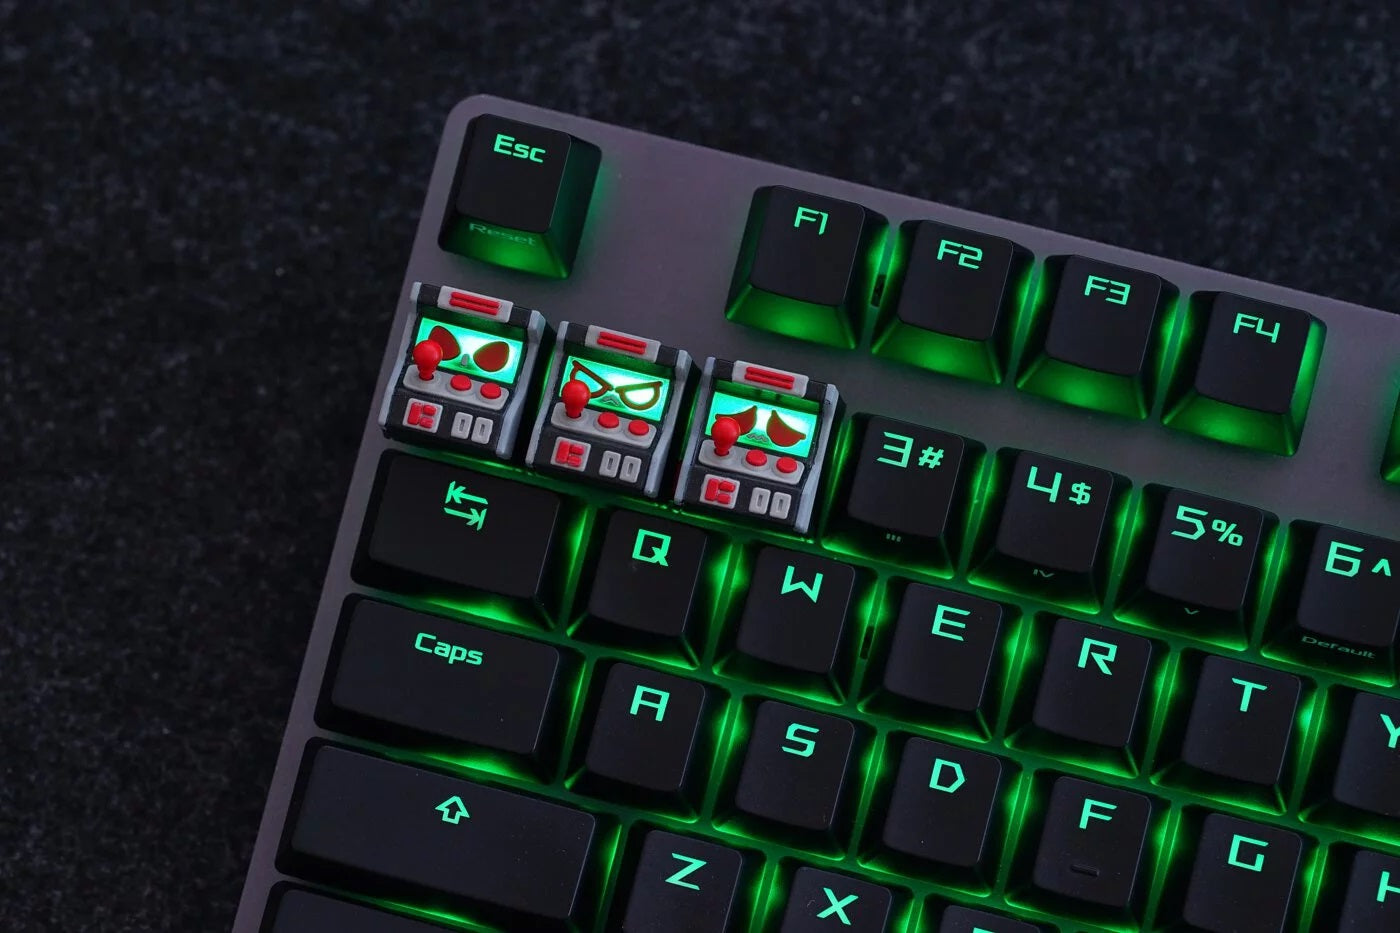 Hot Keys Project HKP Error Angry Black Grey Red Artisan Keycap